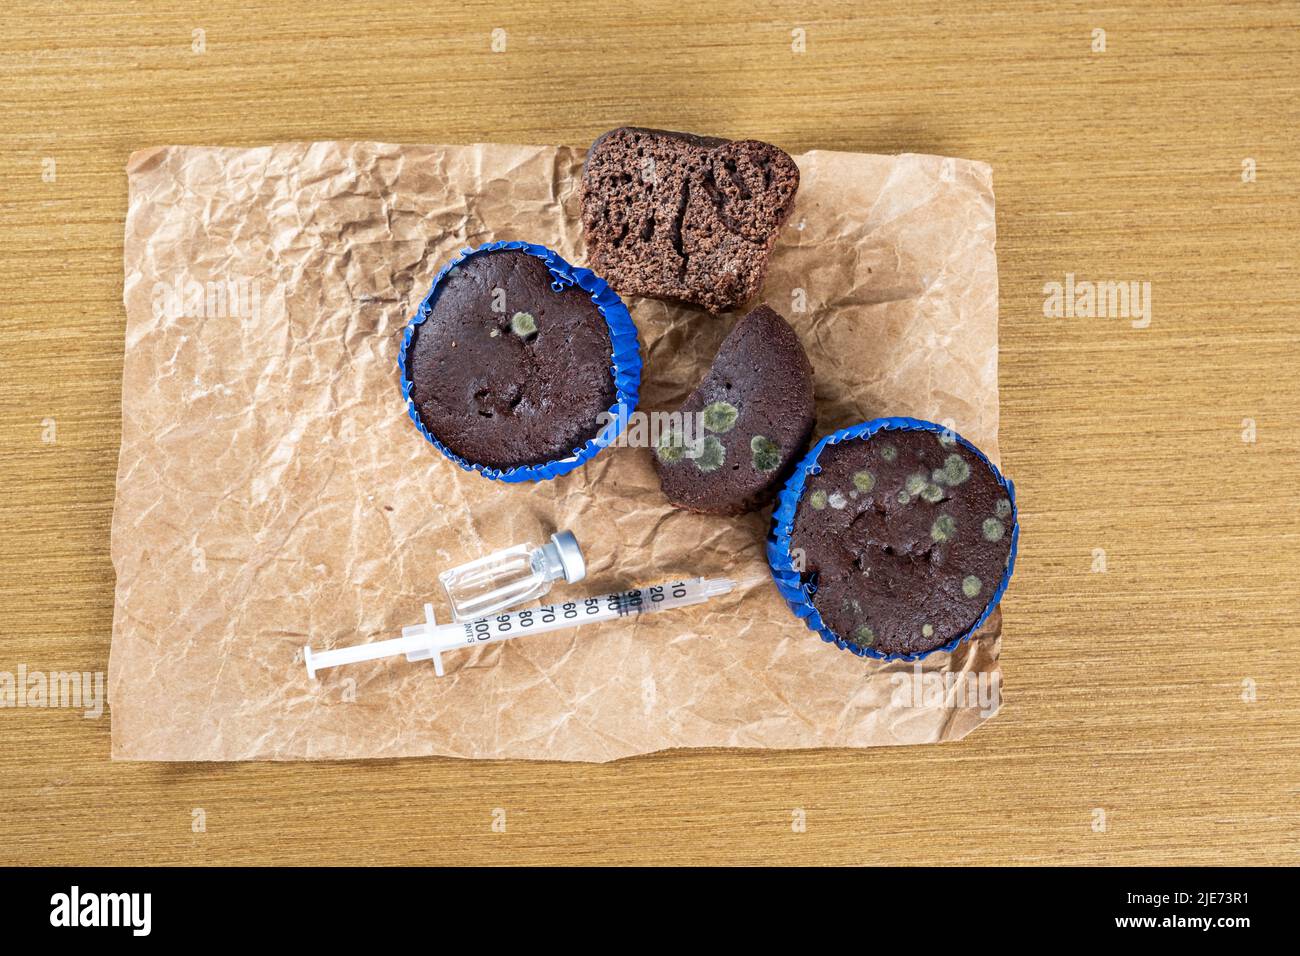 Syringe with insulin next to old, moldy muffins top view. Stock Photo